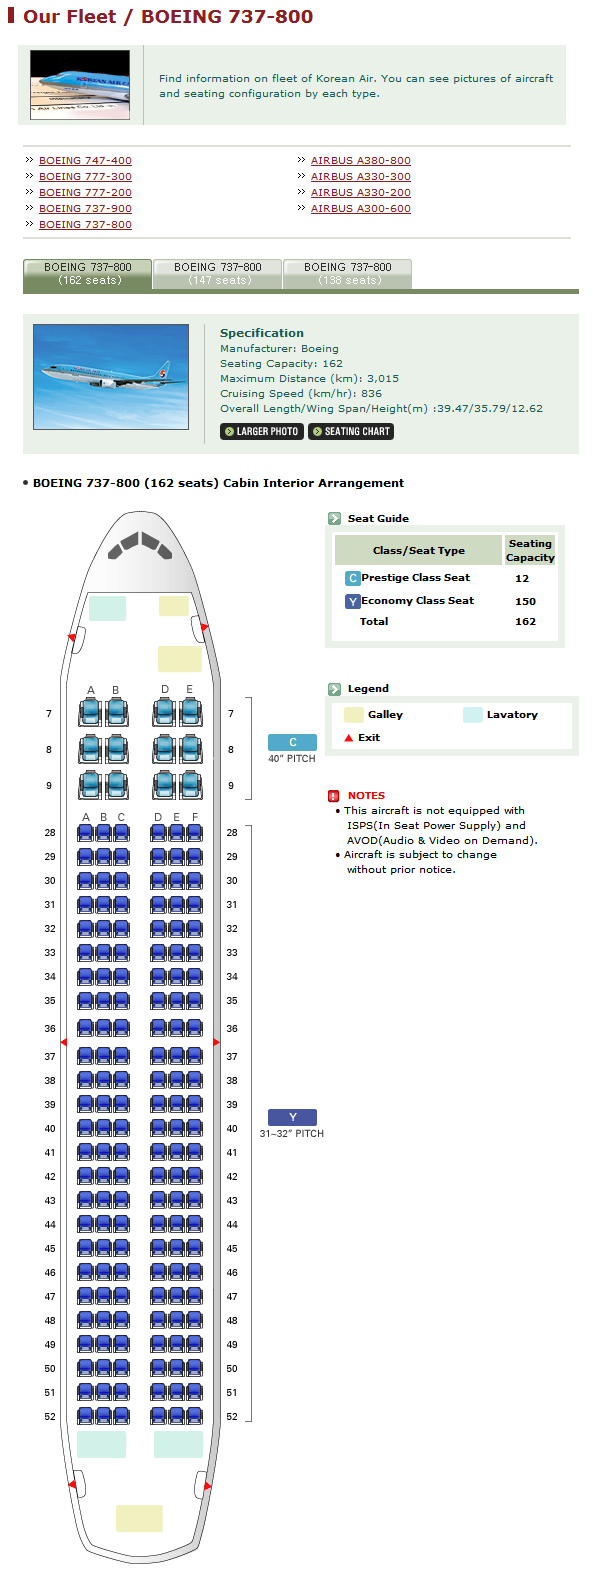 KOREAN AIR AIRLINES BOEING 737-800 AIRCRAFT SEATING CHART